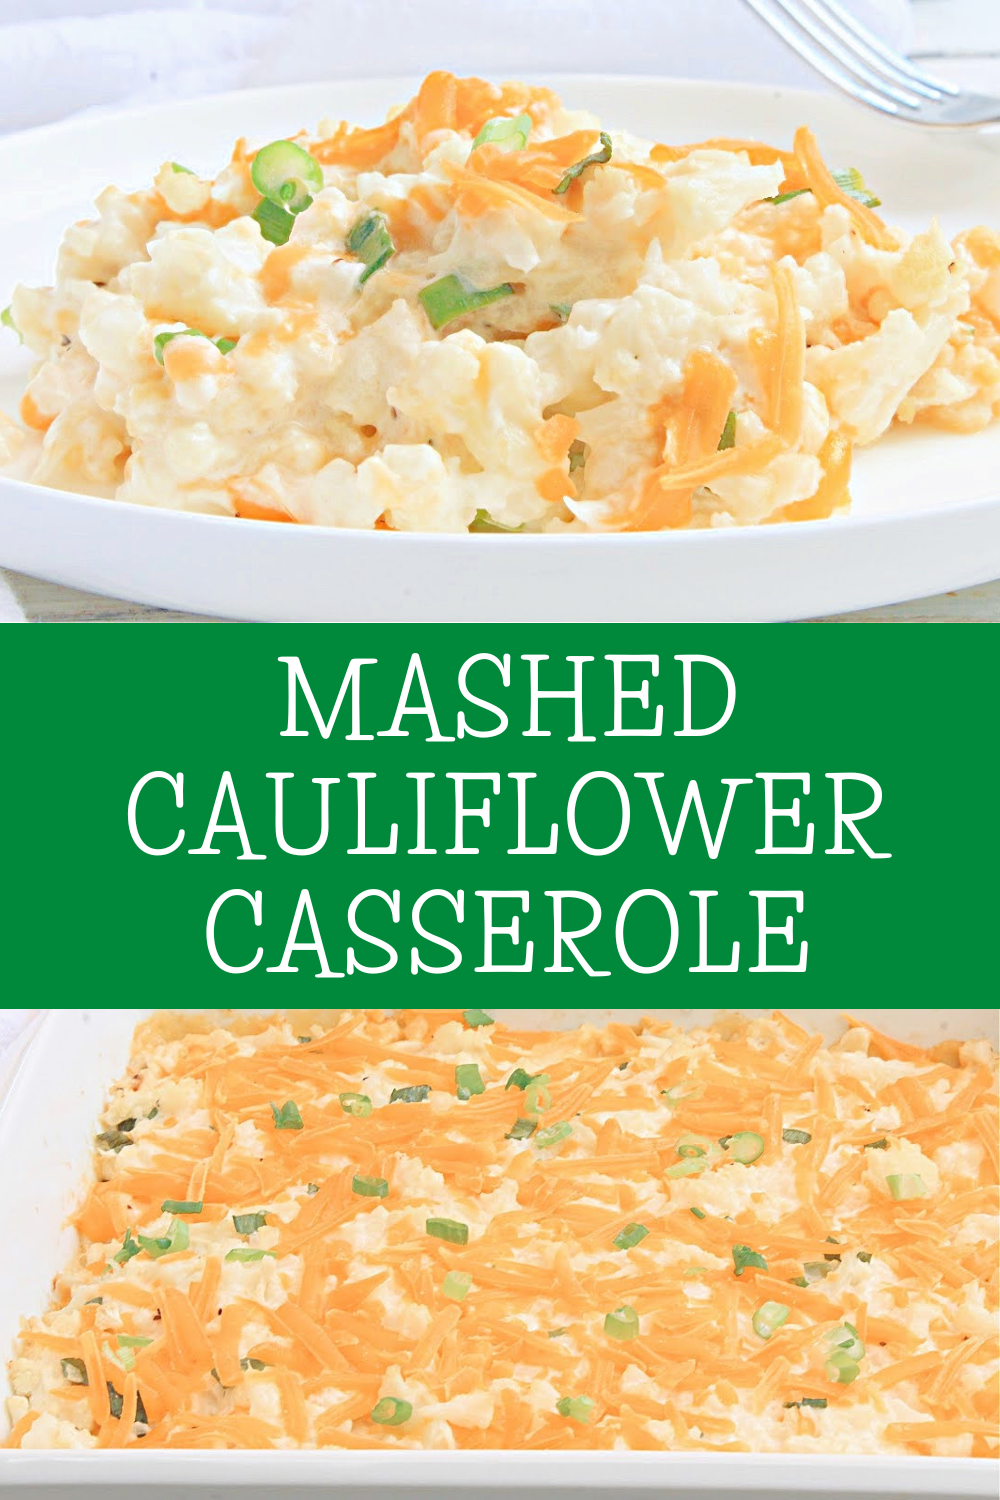 Mashed Cauliflower Casserole ~ Cauliflower smashed to a chunky consistency and then baked in creamy, dairy-free cheese sauce for an easy and flavorful side dish. Perfect for holidays or everyday dinners! via @thiswifecooks